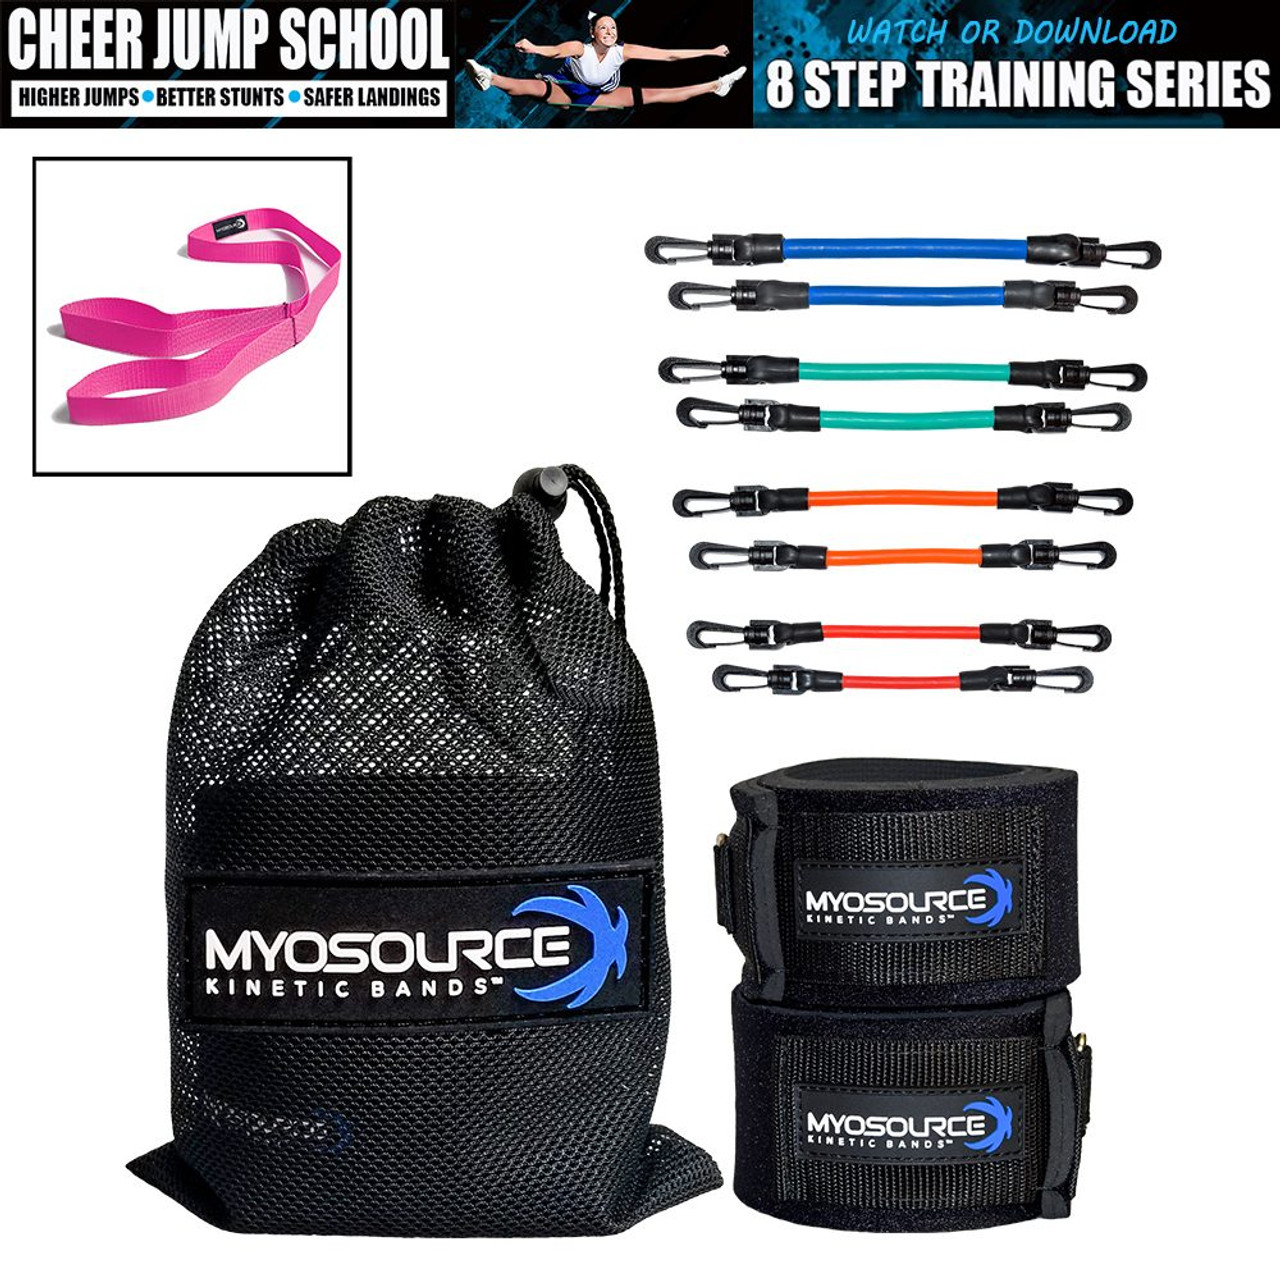 Cheer Kinetic Bands Flexibility Fitness Training Kit for Cheerleaders ...